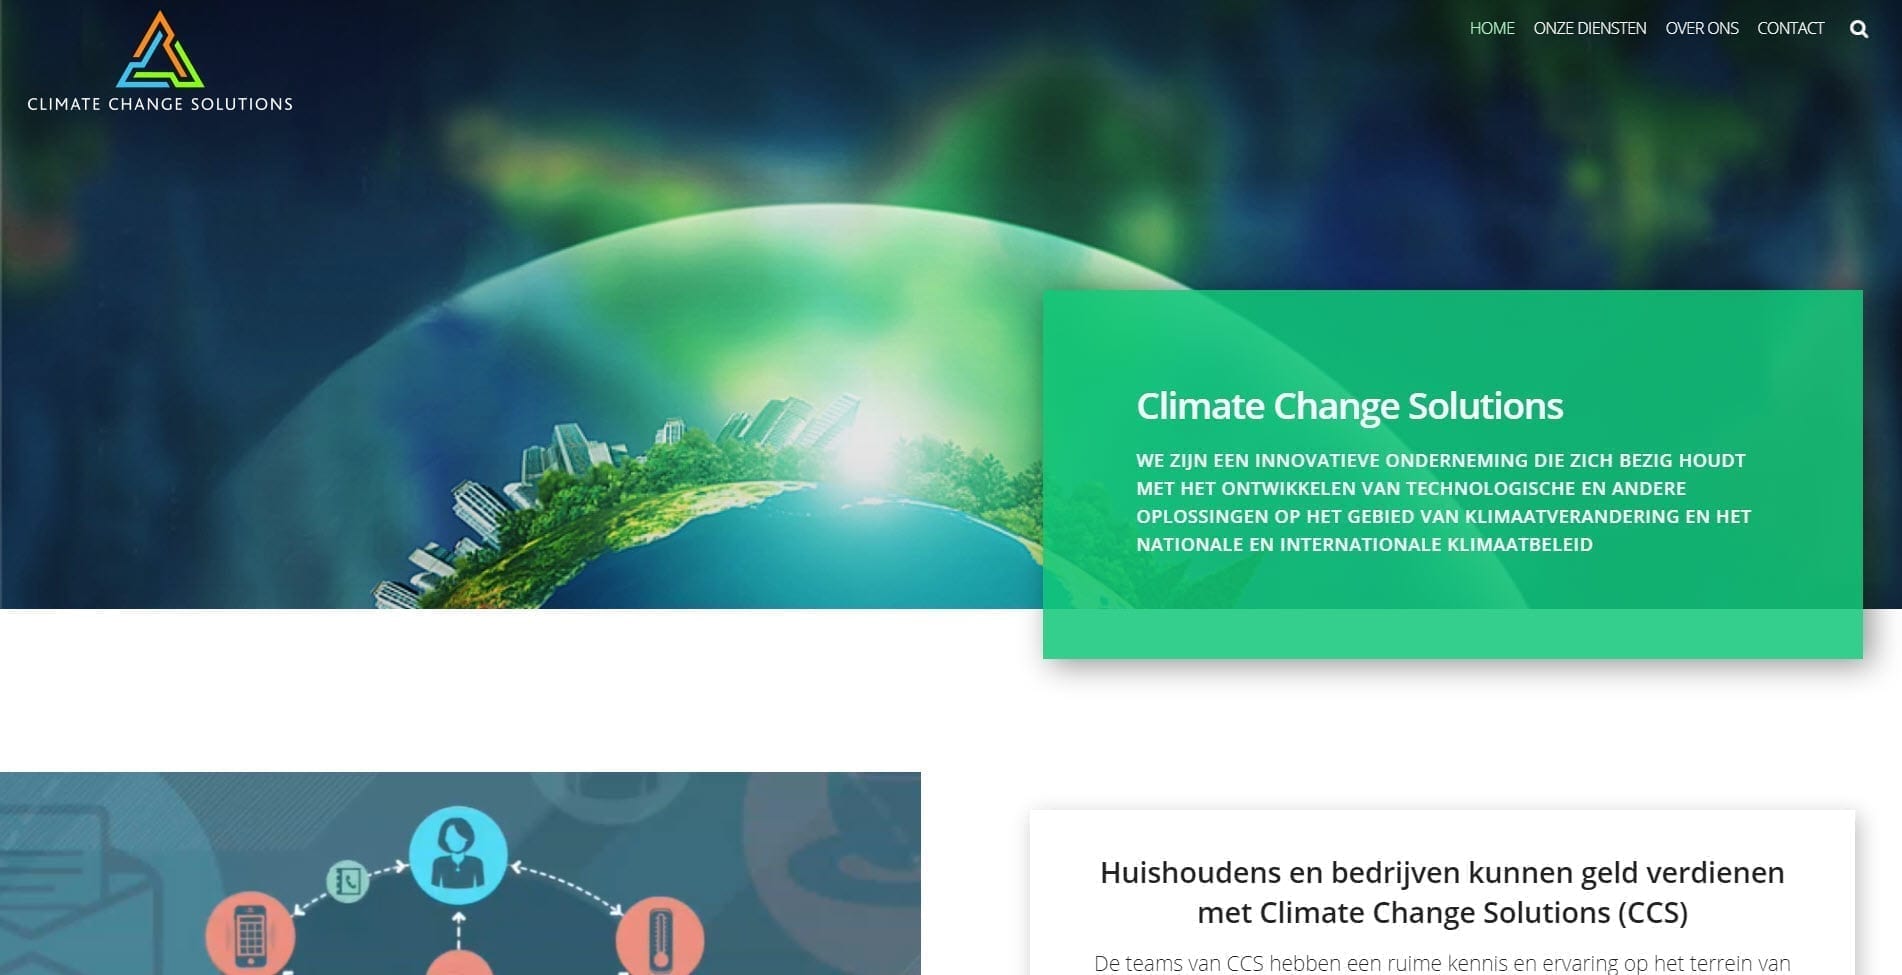 climatechangesolutions.nl.new